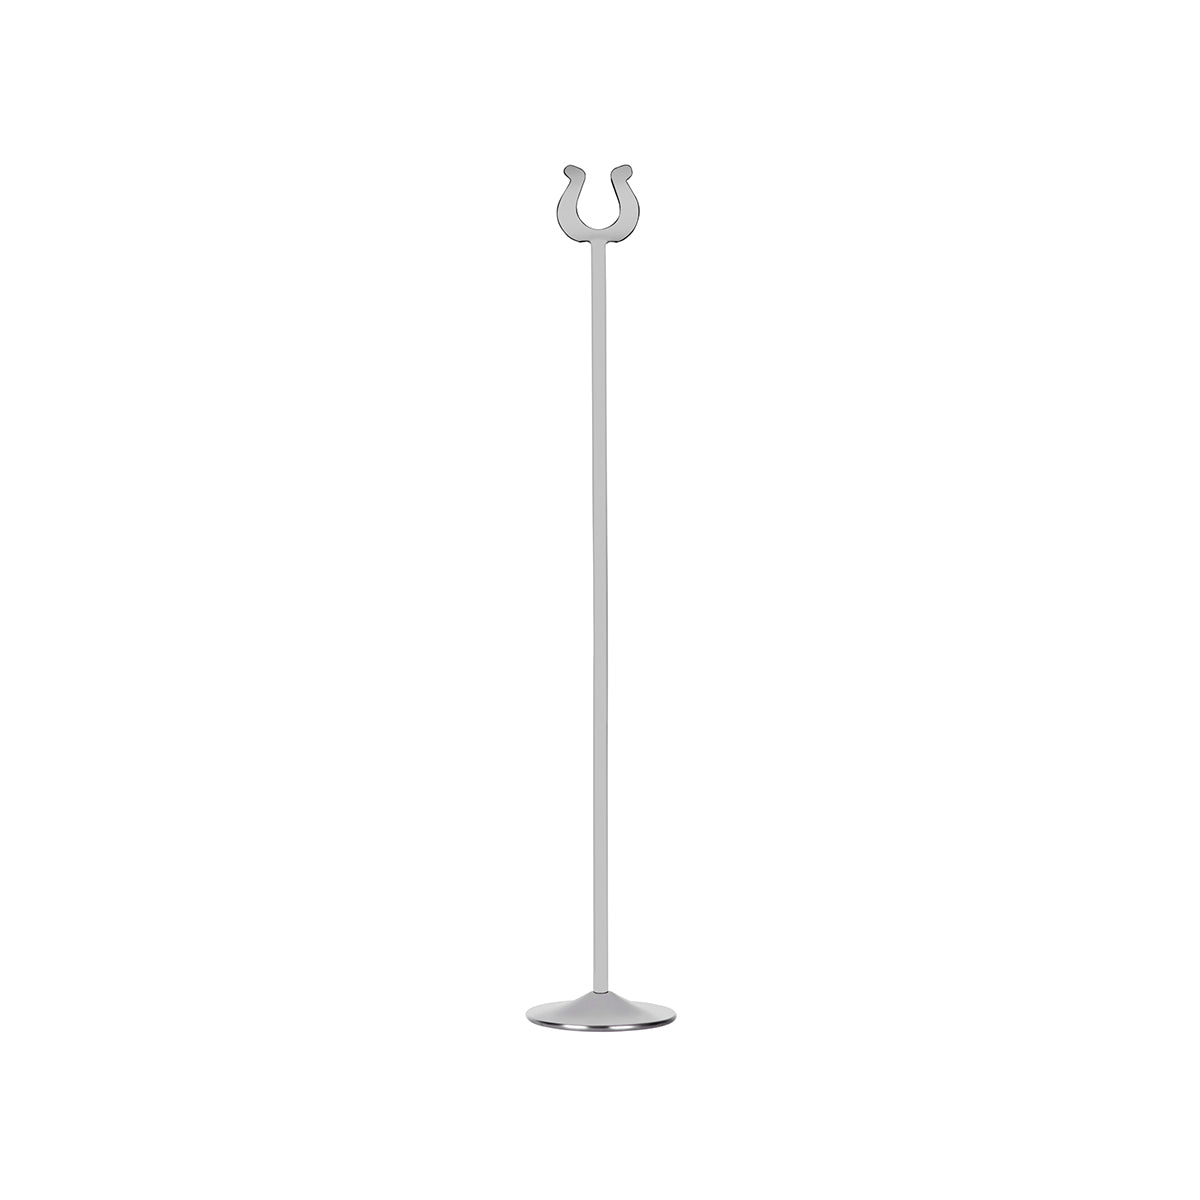 08127 Chef Inox Table Number Stand Stainless Steel 460mm Tomkin Australia Hospitality Supplies